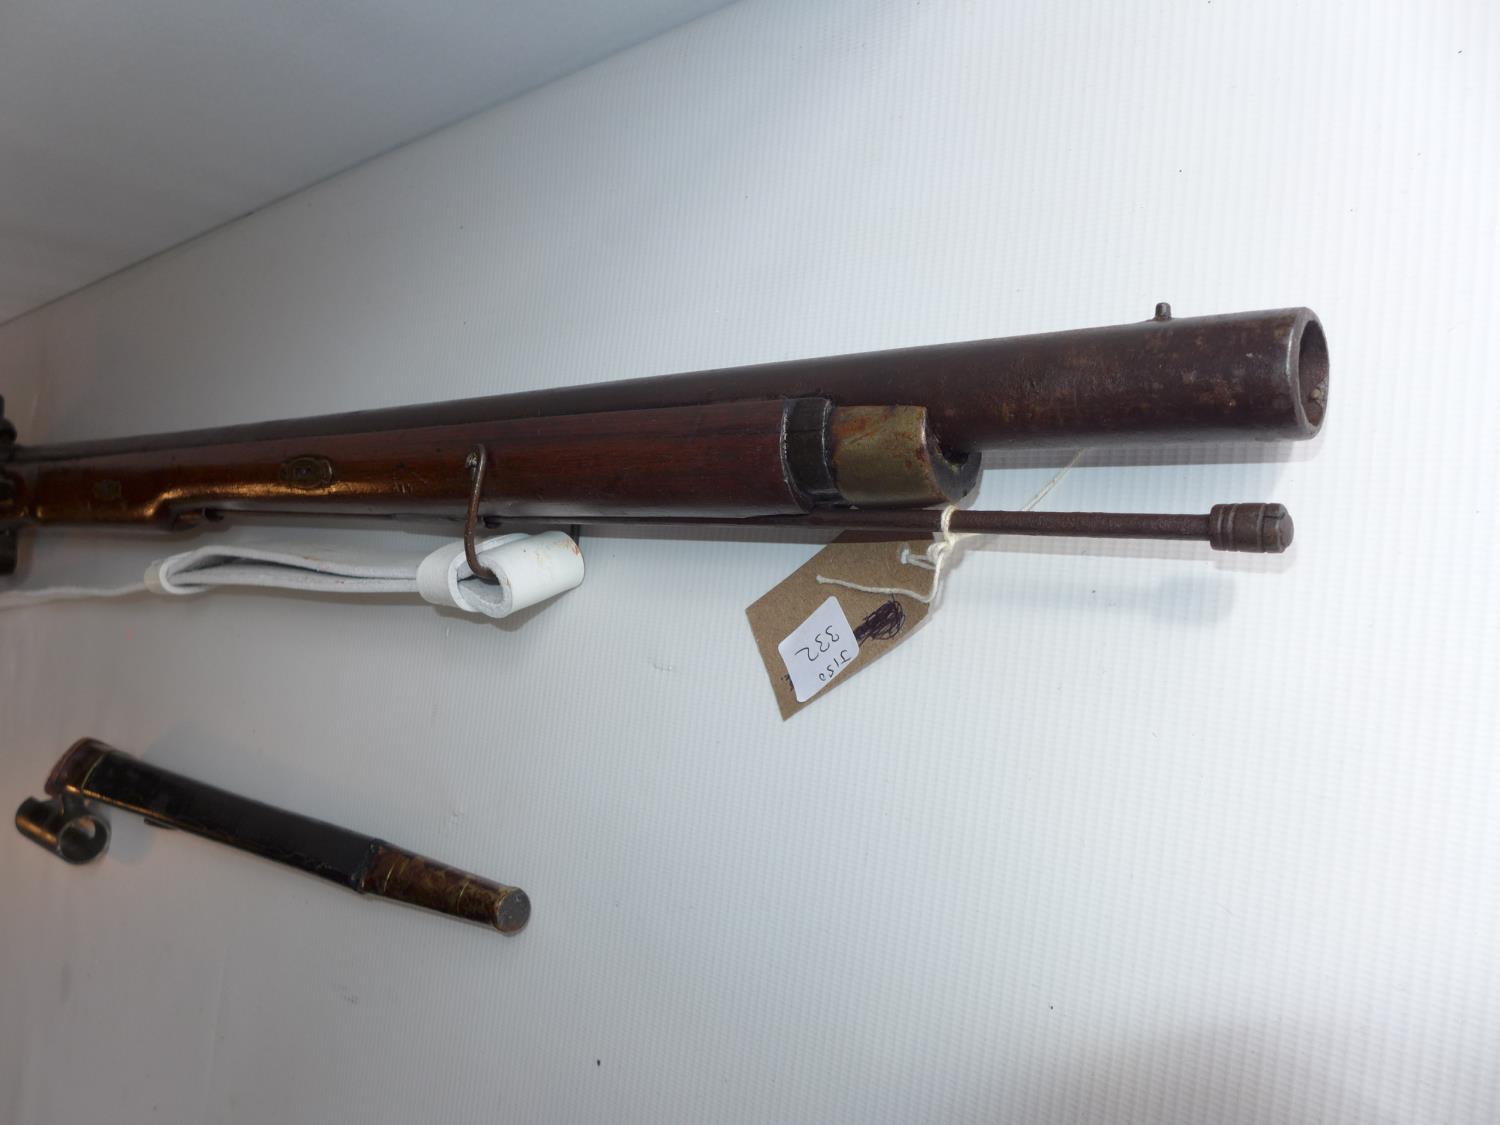 AN EAST INDIA COMPANY PERCUSSION CAP BROWN BESS MUSKET AND BAYONET, LOCK MARKED HURST, LENGTH OF - Image 10 of 11